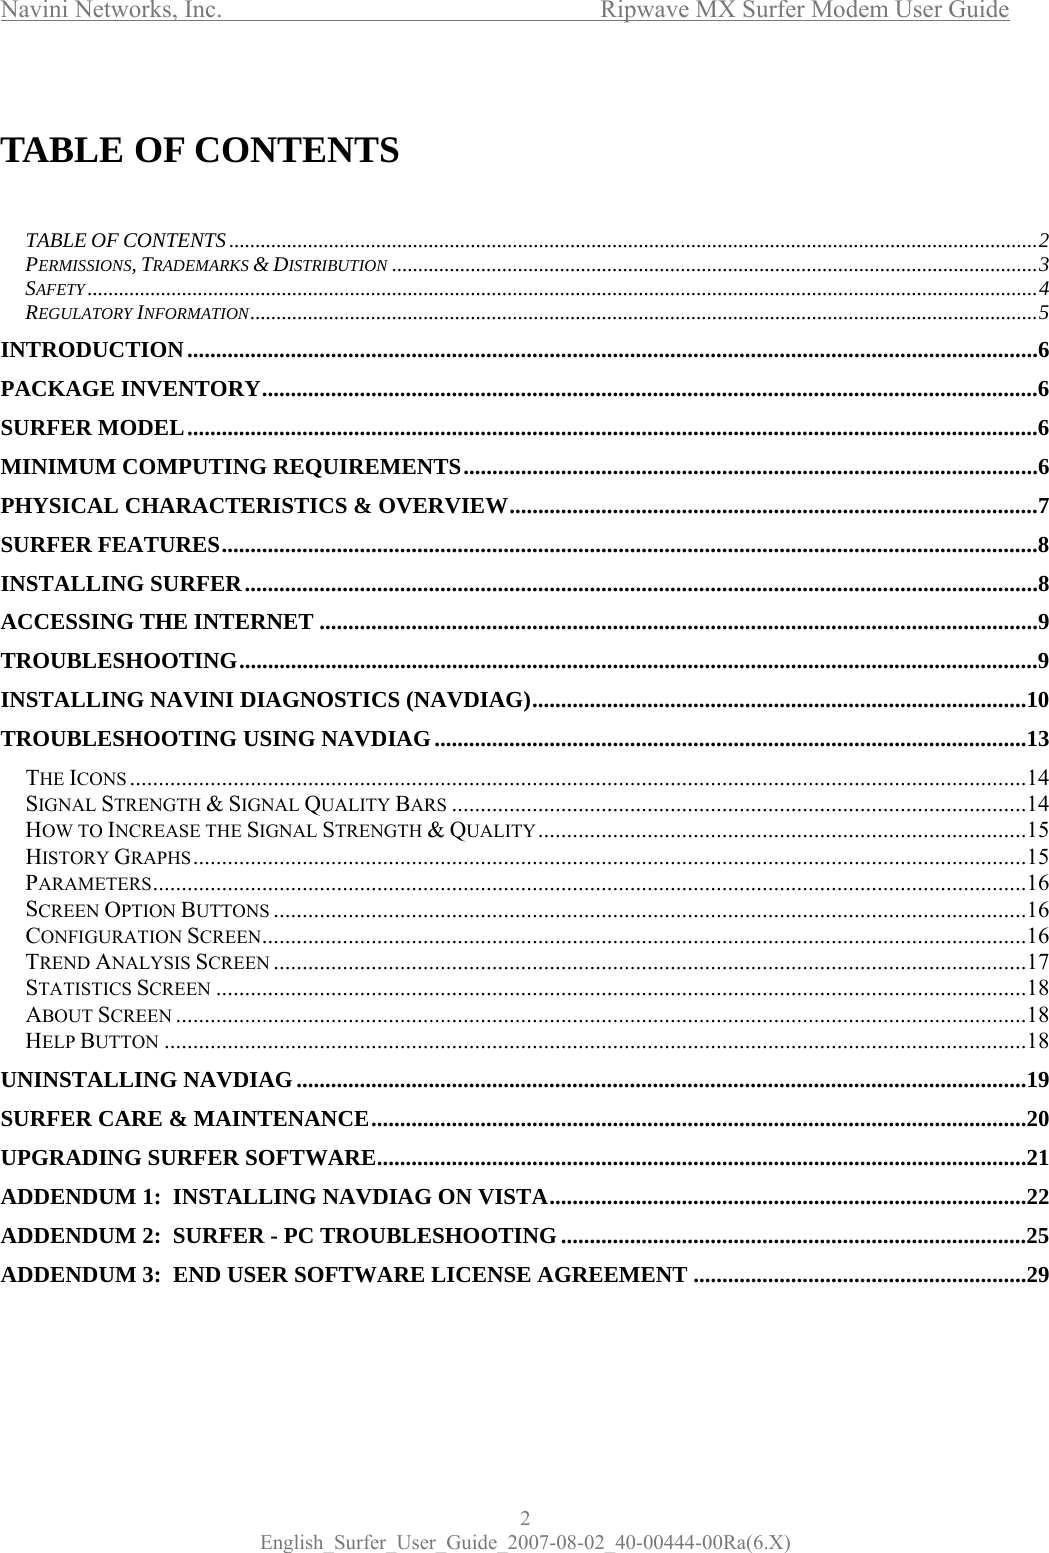 Navini Networks, Inc.      Ripwave MX Surfer Modem User Guide 2 English_Surfer_User_Guide_2007-08-02_40-00444-00Ra(6.X)  TABLE OF CONTENTS   TABLE OF CONTENTS..........................................................................................................................................................2 PERMISSIONS, TRADEMARKS &amp; DISTRIBUTION ...........................................................................................................................3 SAFETY .....................................................................................................................................................................................4 REGULATORY INFORMATION......................................................................................................................................................5 INTRODUCTION....................................................................................................................................................6 PACKAGE INVENTORY.......................................................................................................................................6 SURFER MODEL....................................................................................................................................................6 MINIMUM COMPUTING REQUIREMENTS....................................................................................................6 PHYSICAL CHARACTERISTICS &amp; OVERVIEW............................................................................................7 SURFER FEATURES..............................................................................................................................................8 INSTALLING SURFER..........................................................................................................................................8 ACCESSING THE INTERNET .............................................................................................................................9 TROUBLESHOOTING...........................................................................................................................................9 INSTALLING NAVINI DIAGNOSTICS (NAVDIAG)......................................................................................10 TROUBLESHOOTING USING NAVDIAG .......................................................................................................13 THE ICONS ............................................................................................................................................................14 SIGNAL STRENGTH &amp; SIGNAL QUALITY BARS ....................................................................................................14 HOW TO INCREASE THE SIGNAL STRENGTH &amp; QUALITY.....................................................................................15 HISTORY GRAPHS.................................................................................................................................................15 PARAMETERS........................................................................................................................................................16 SCREEN OPTION BUTTONS ...................................................................................................................................16 CONFIGURATION SCREEN.....................................................................................................................................16 TREND ANALYSIS SCREEN ...................................................................................................................................17 STATISTICS SCREEN .............................................................................................................................................18 ABOUT SCREEN ....................................................................................................................................................18 HELP BUTTON ......................................................................................................................................................18 UNINSTALLING NAVDIAG...............................................................................................................................19 SURFER CARE &amp; MAINTENANCE..................................................................................................................20 UPGRADING SURFER SOFTWARE.................................................................................................................21 ADDENDUM 1:  INSTALLING NAVDIAG ON VISTA...................................................................................22 ADDENDUM 2:  SURFER - PC TROUBLESHOOTING .................................................................................25 ADDENDUM 3:  END USER SOFTWARE LICENSE AGREEMENT ..........................................................29  